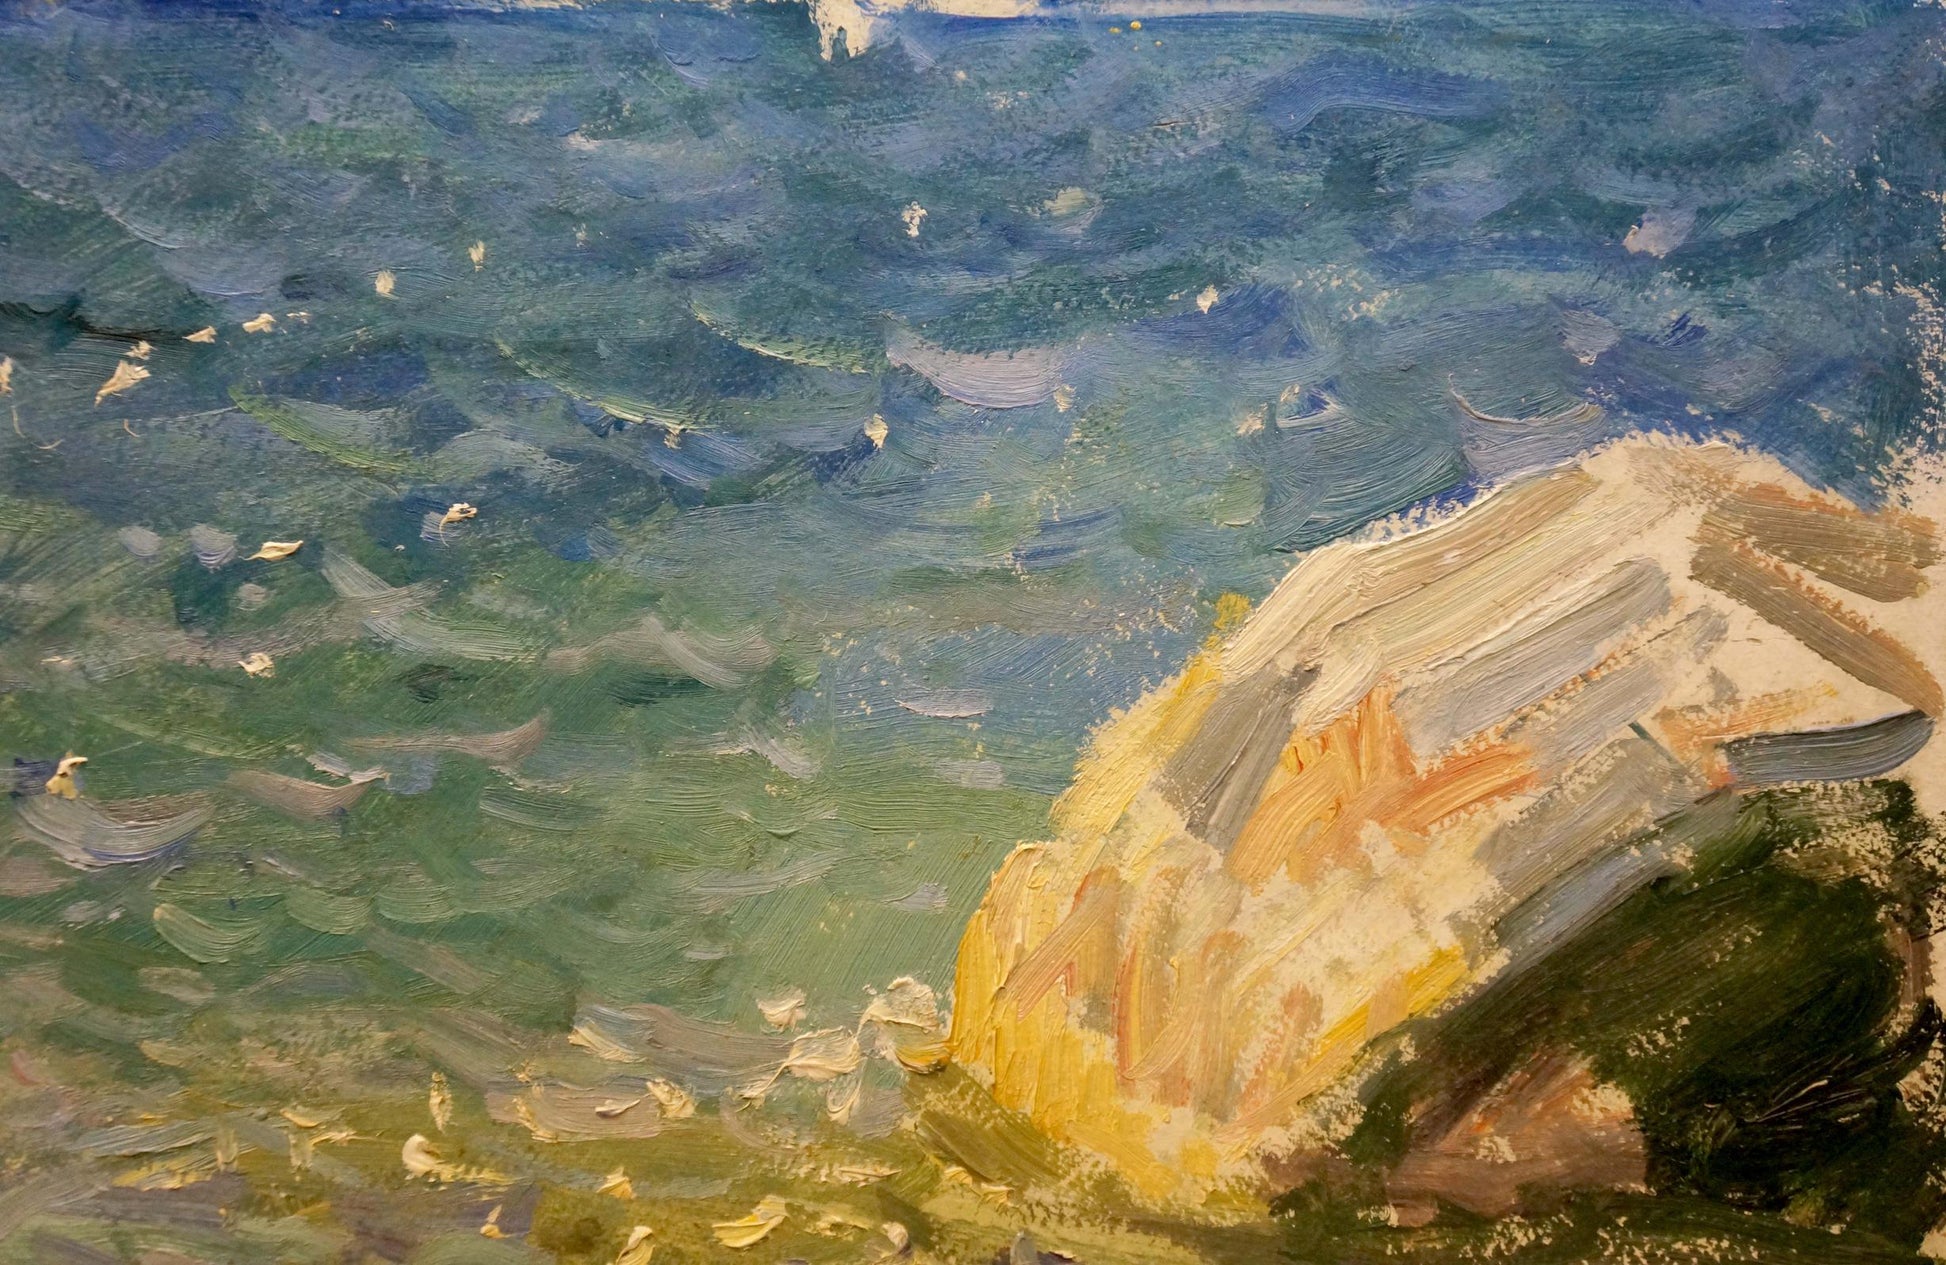 The seashore is the subject of Z. I. Filippov's oil painting study